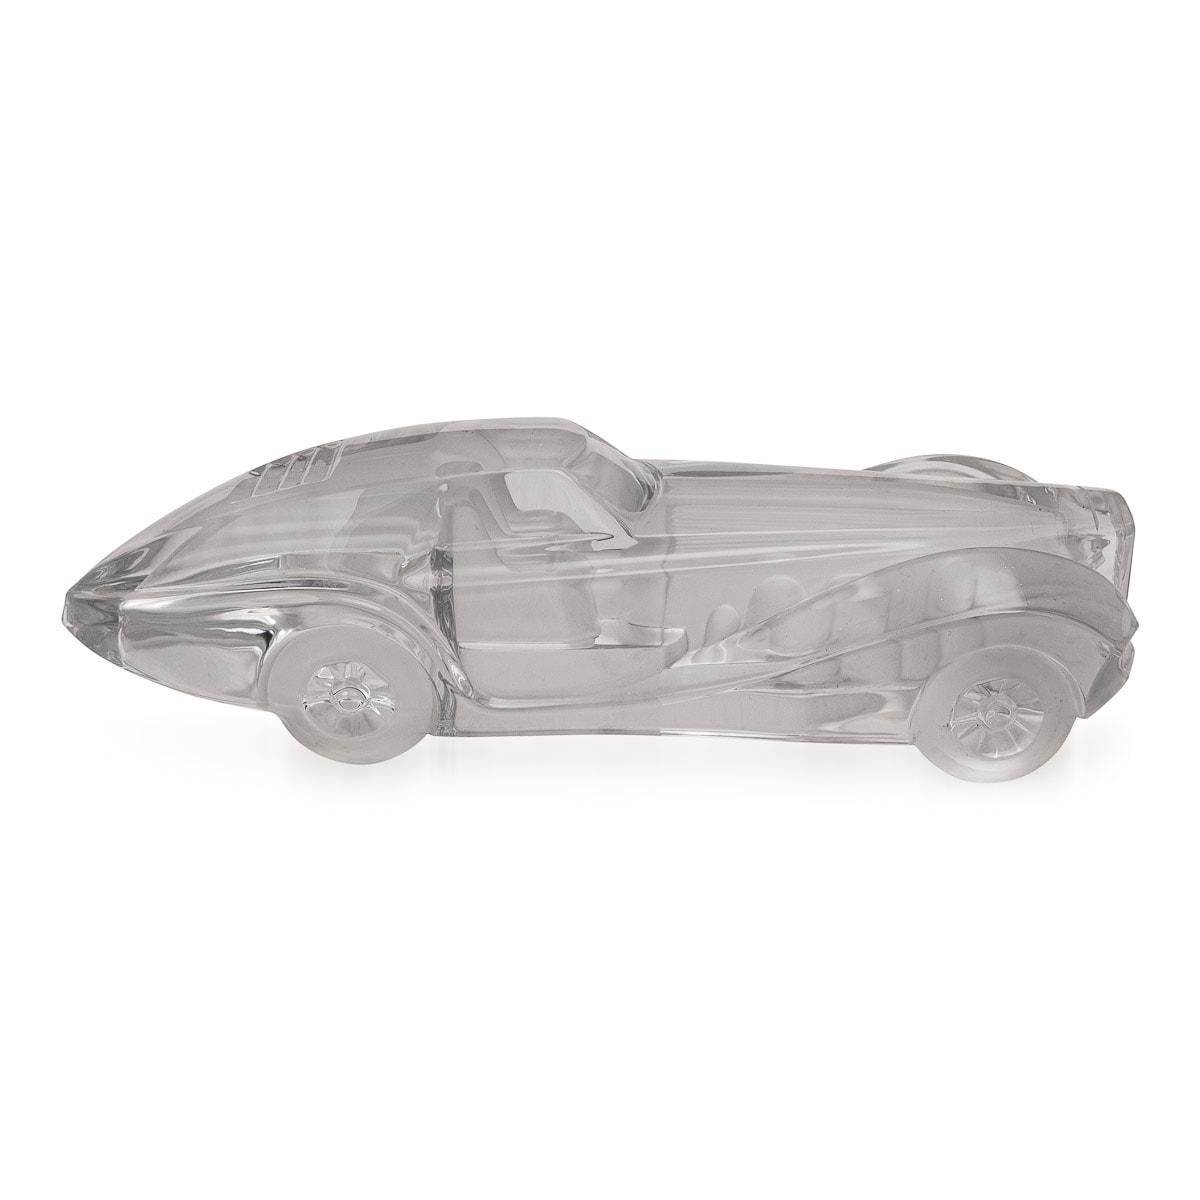 20th Century Model Glass Car By Daum, France, c.1980 For Sale 2